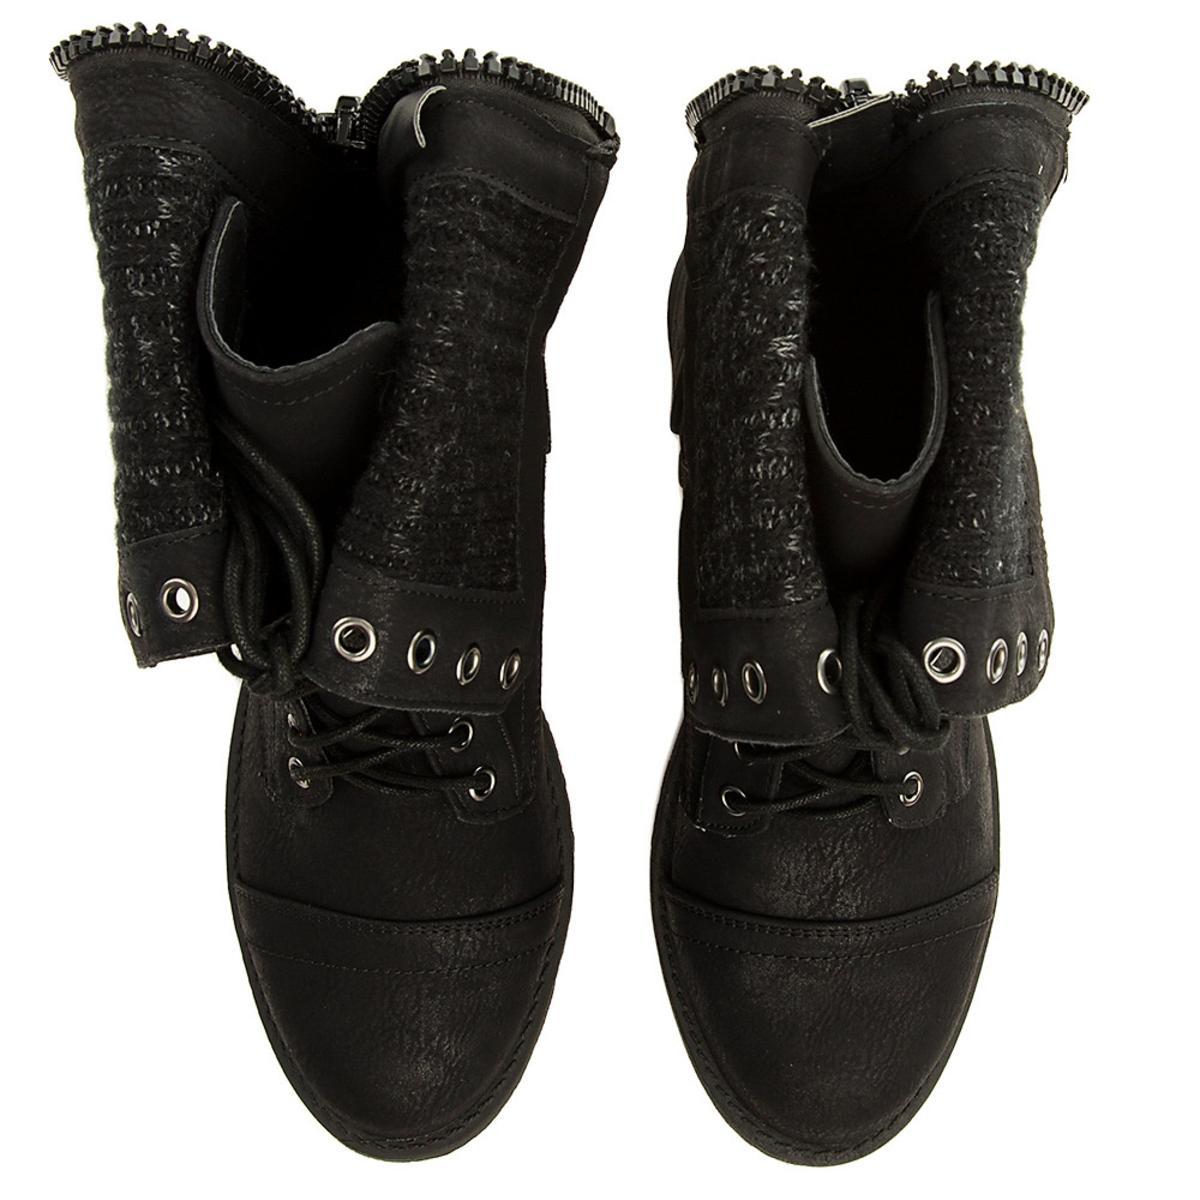 Star-8 Lace-Up Boot Black